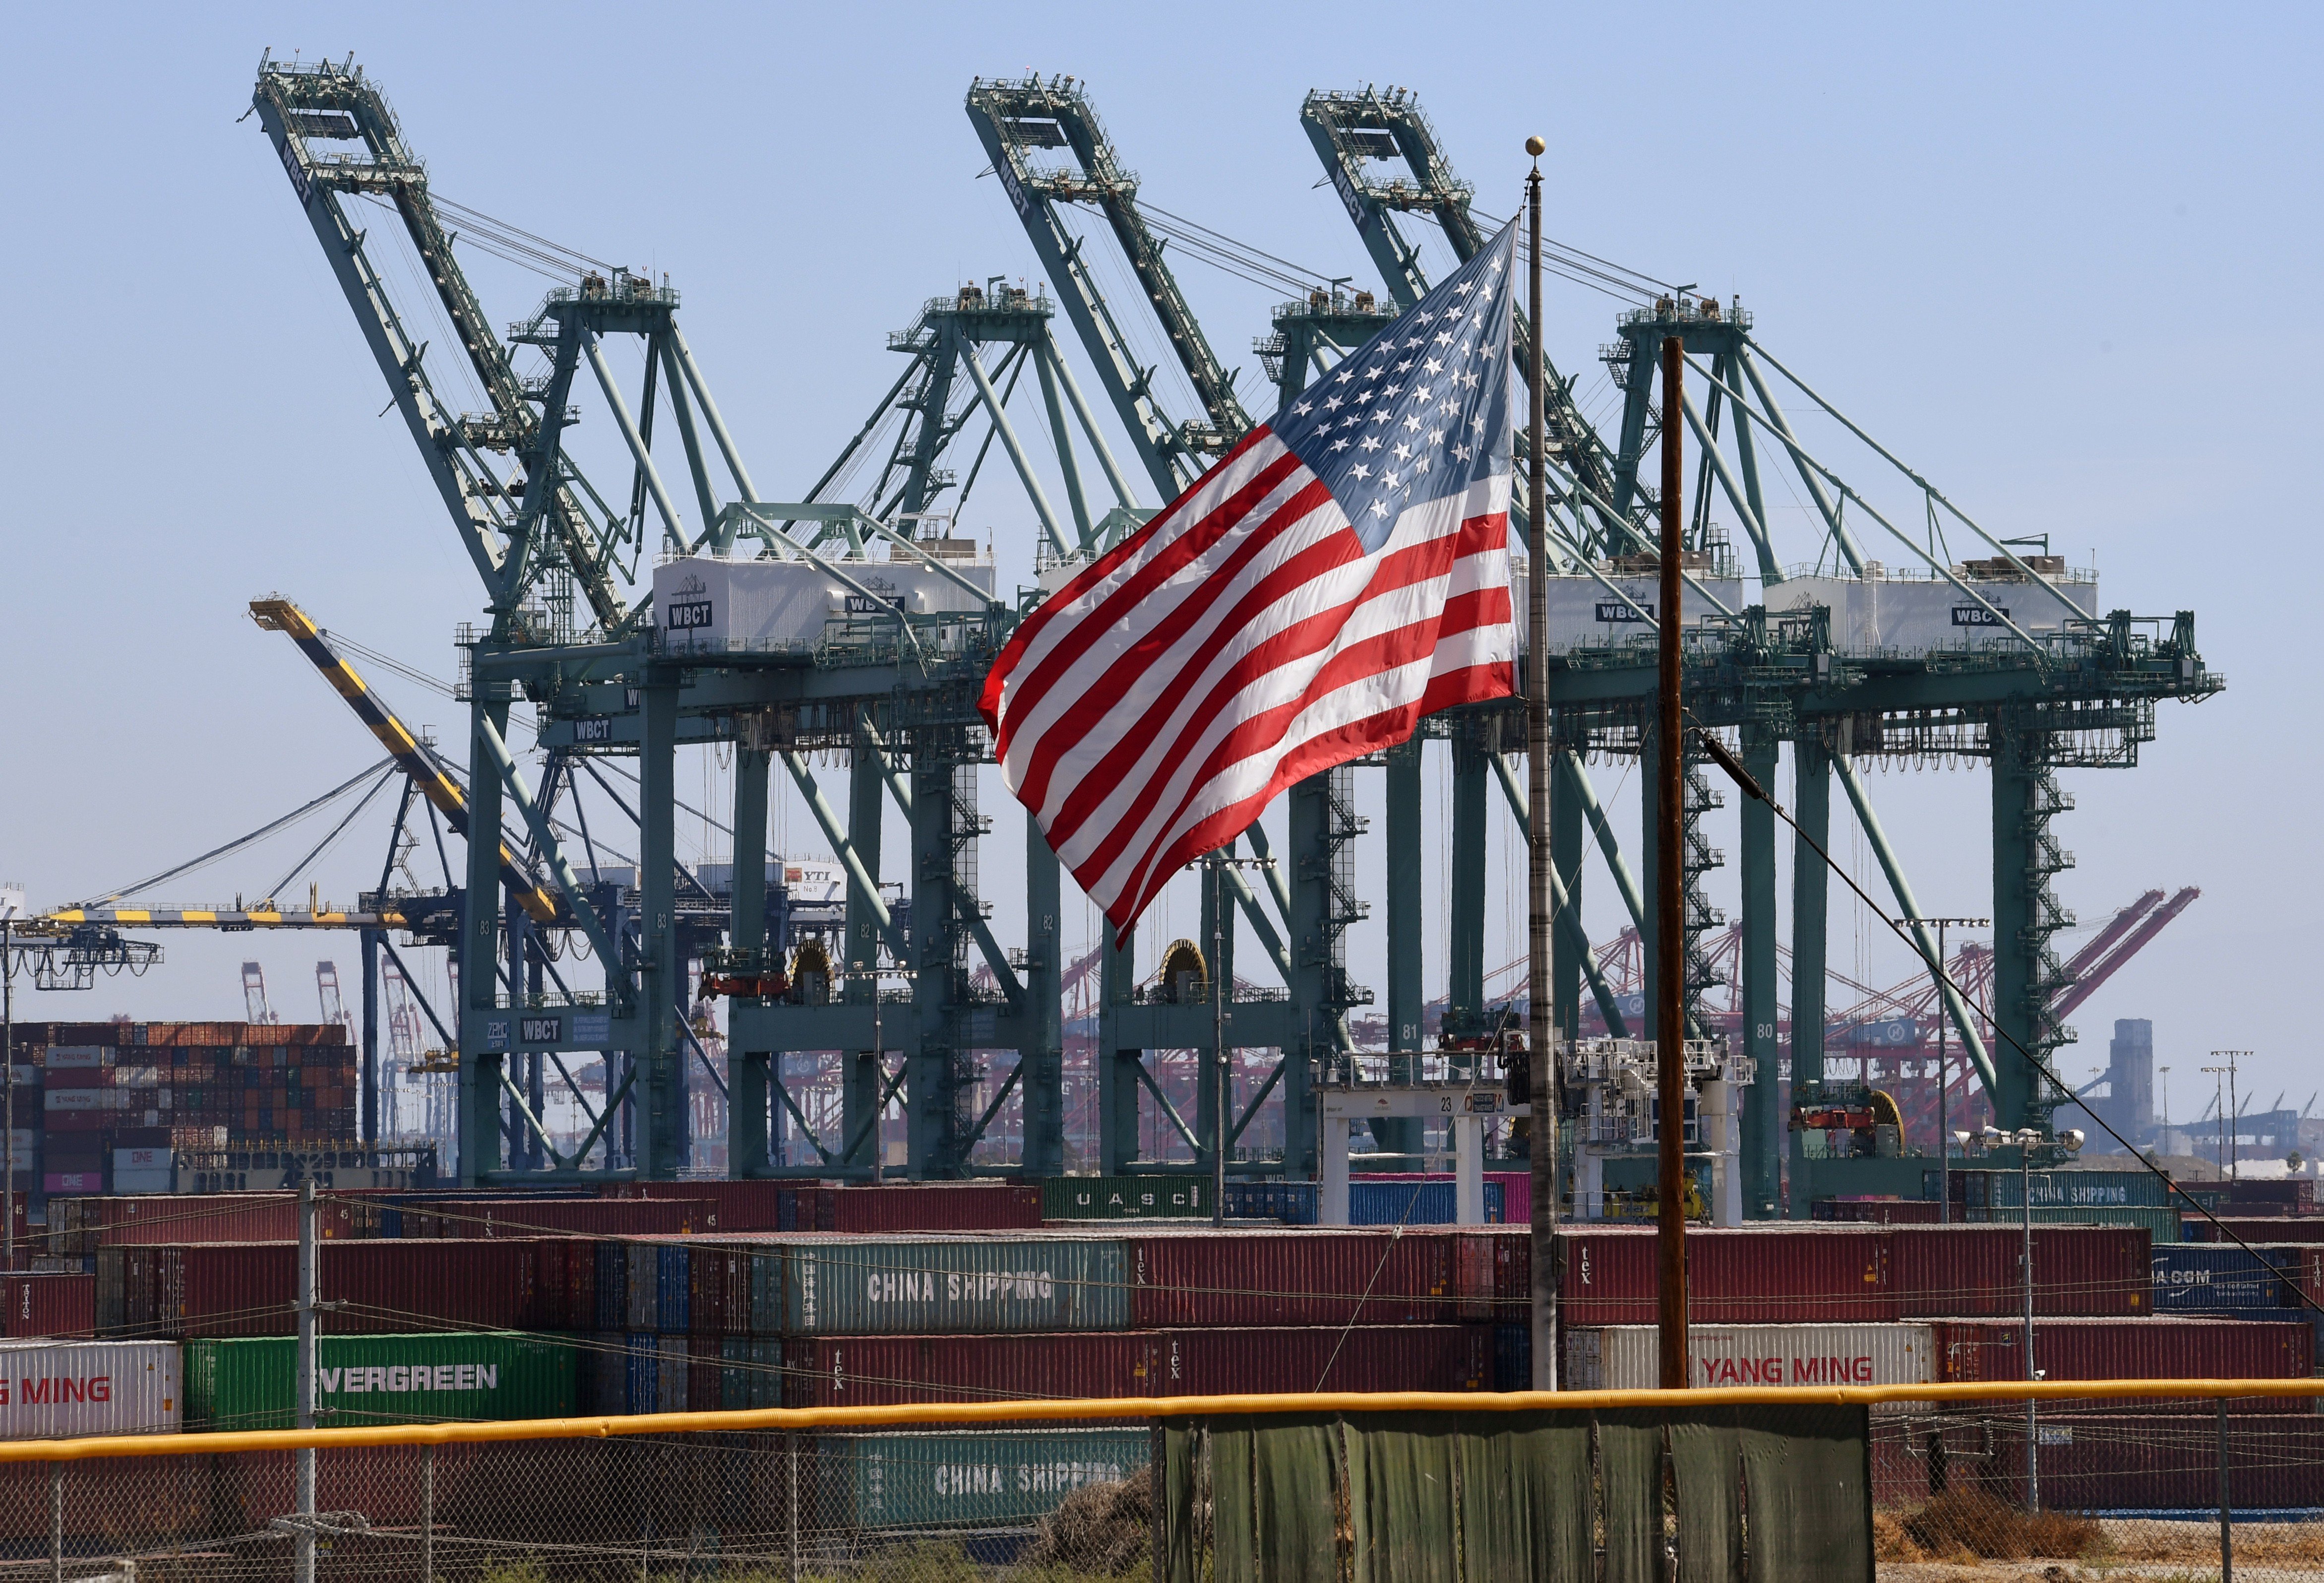 The US flag flies over Chinese shipping containers at the Port of Long Beach in Los Angeles County on September 29, 2018. American companies including Boeing, Dow, General Motors, GE, Ford and Tesla together made up the third-largest congregation of exhibitors at the China International Import Expo in Shanghai from November 5 to 8, 018. Photo: AFP